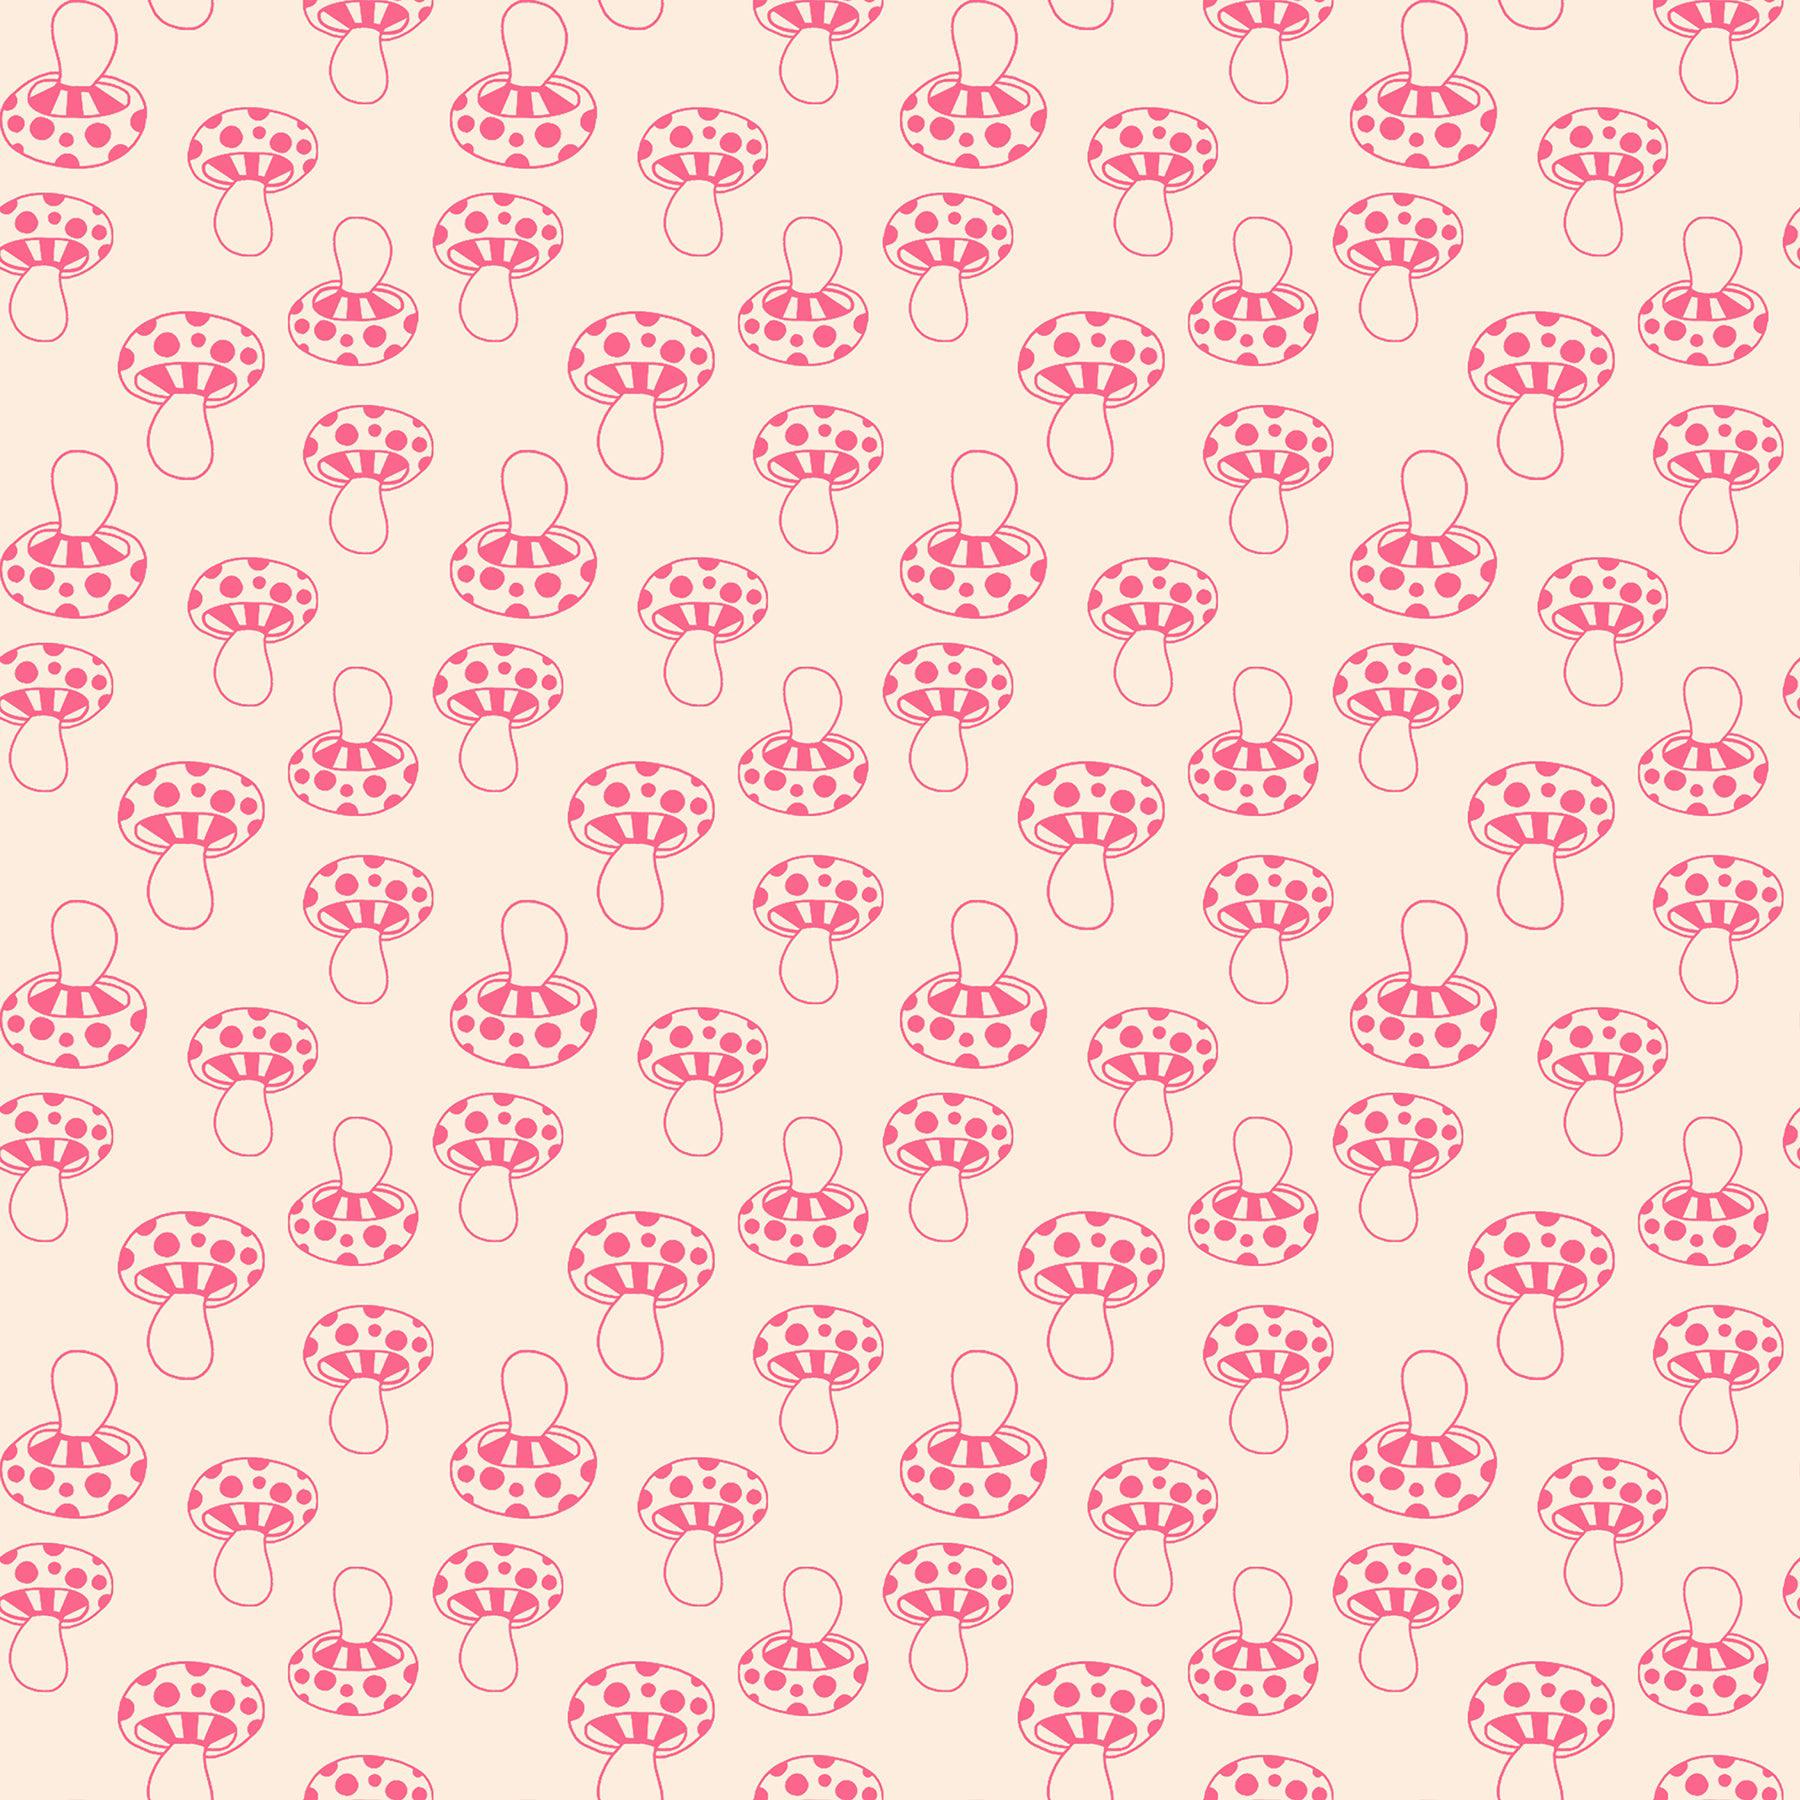 Ruby Star Society-Mushrooms Neon Pink-fabric-gather here online